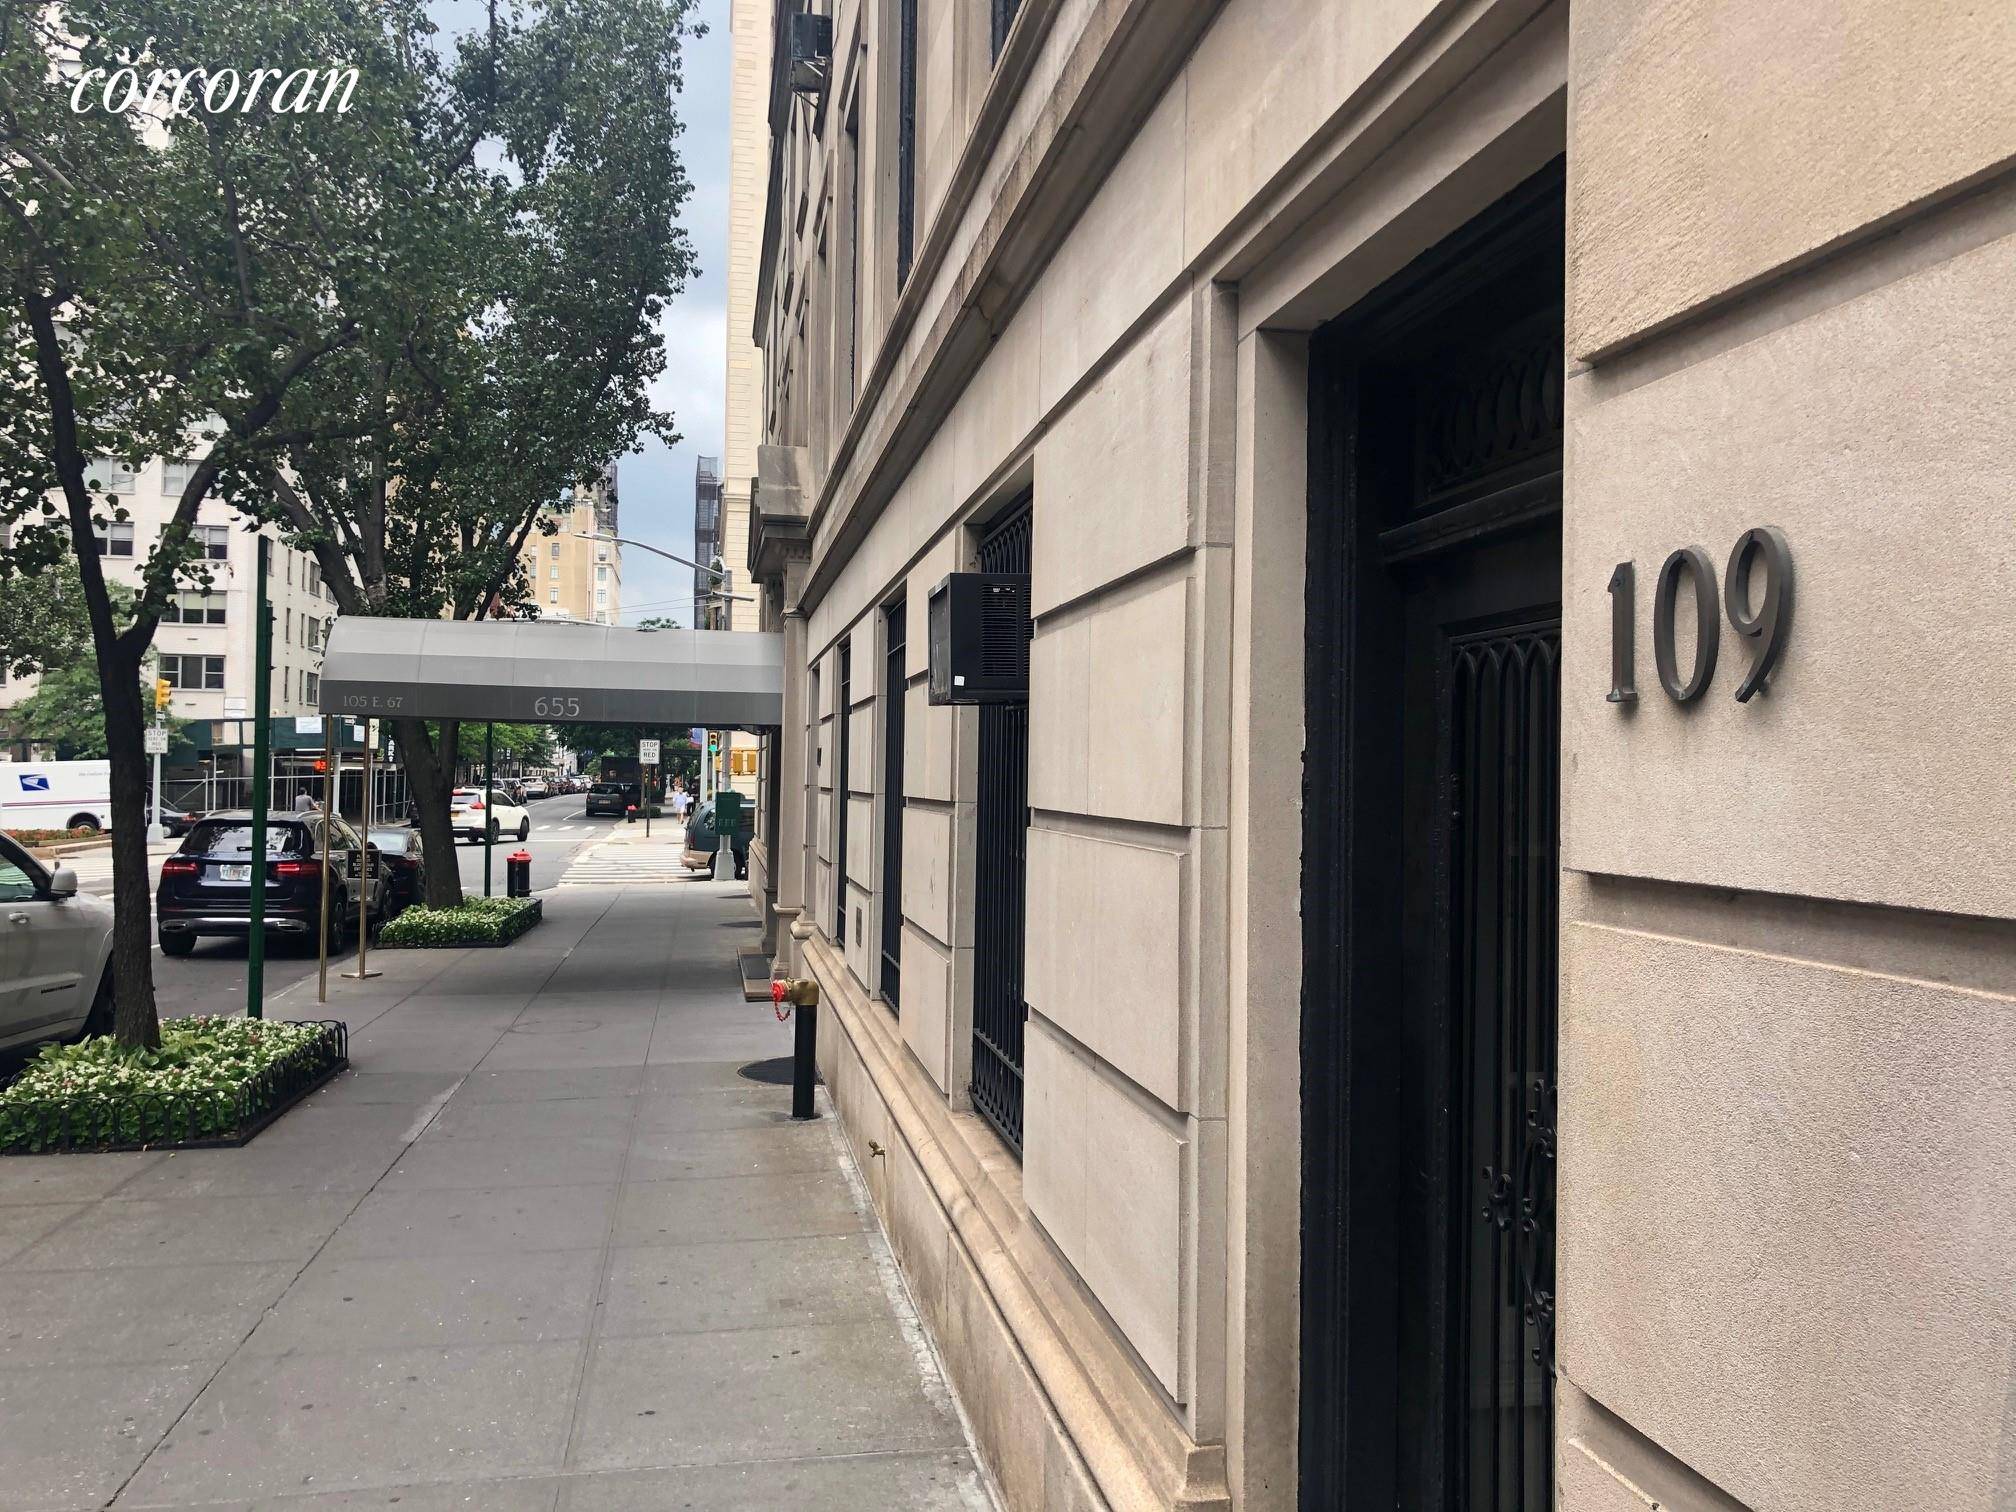 Prime Lenox Hill medical office now available at 109 East 67th Street at the corner of Park Avenue.